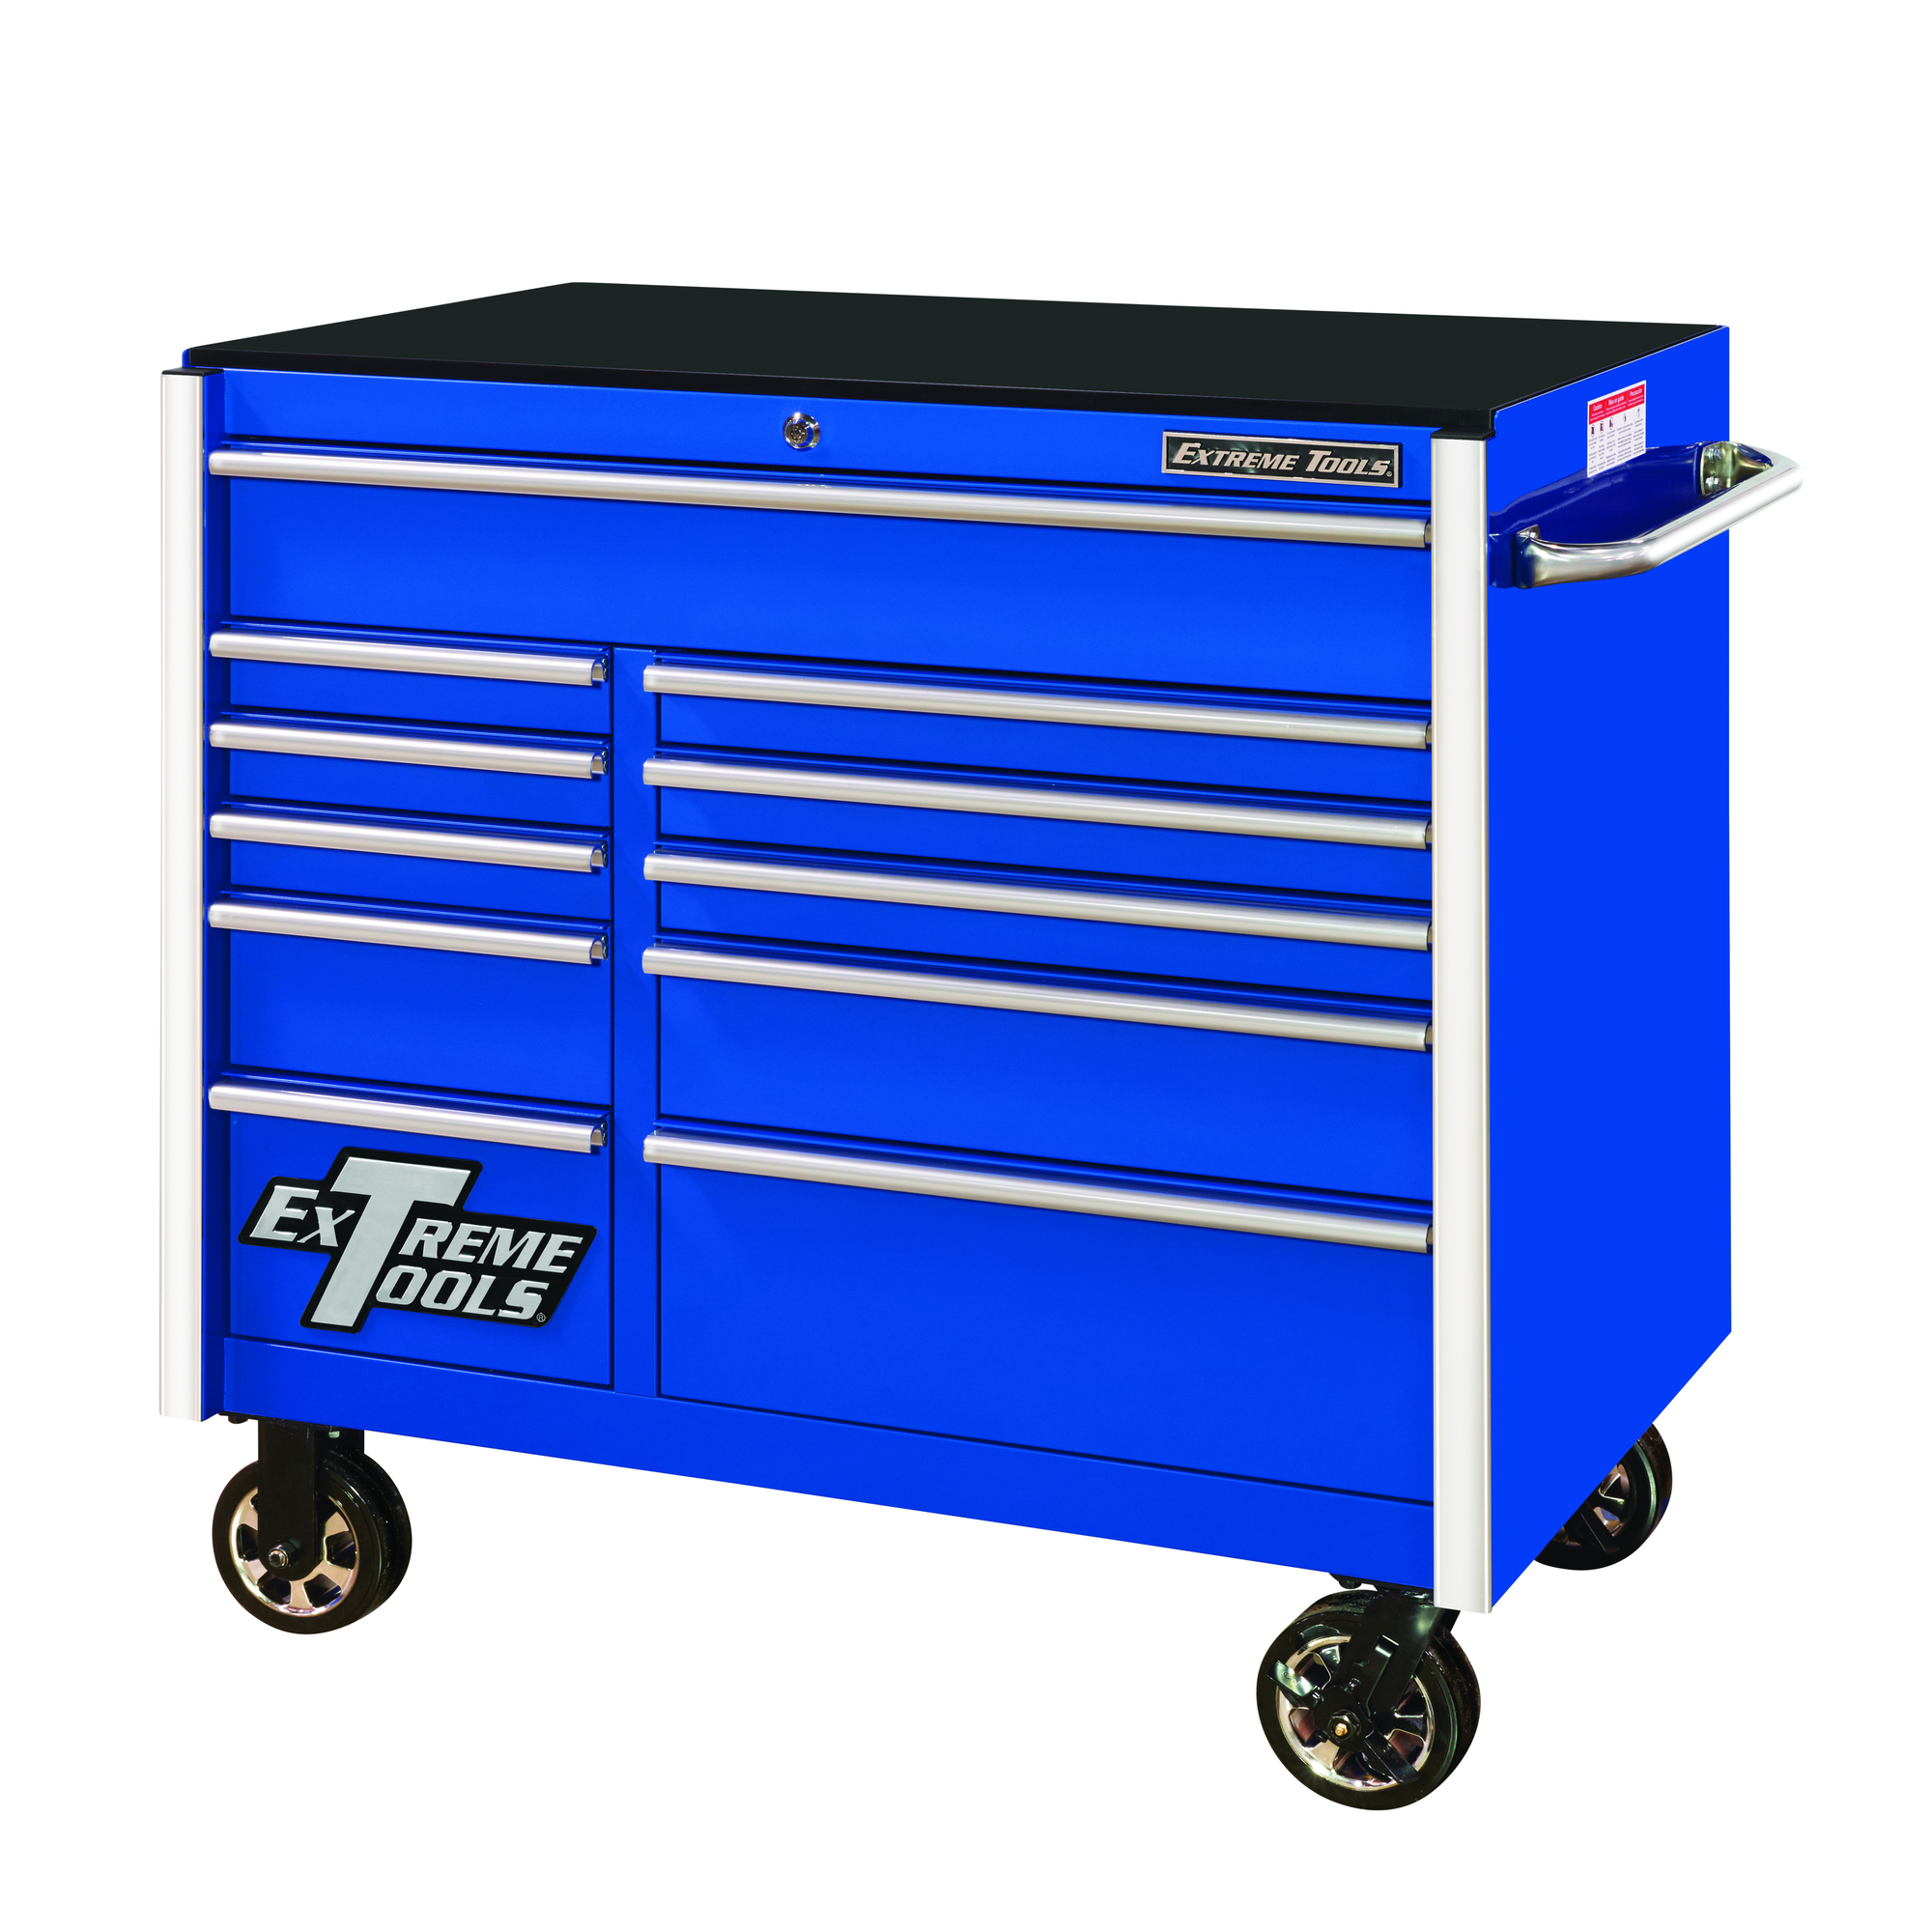 Extreme Tools, RX Series Roller Cab 41Inchx 25Inch, 11-Dr, BL/CH Hndls, Width 41 in, Height 40.5 in, Color Blue, Model RX412511RCBL